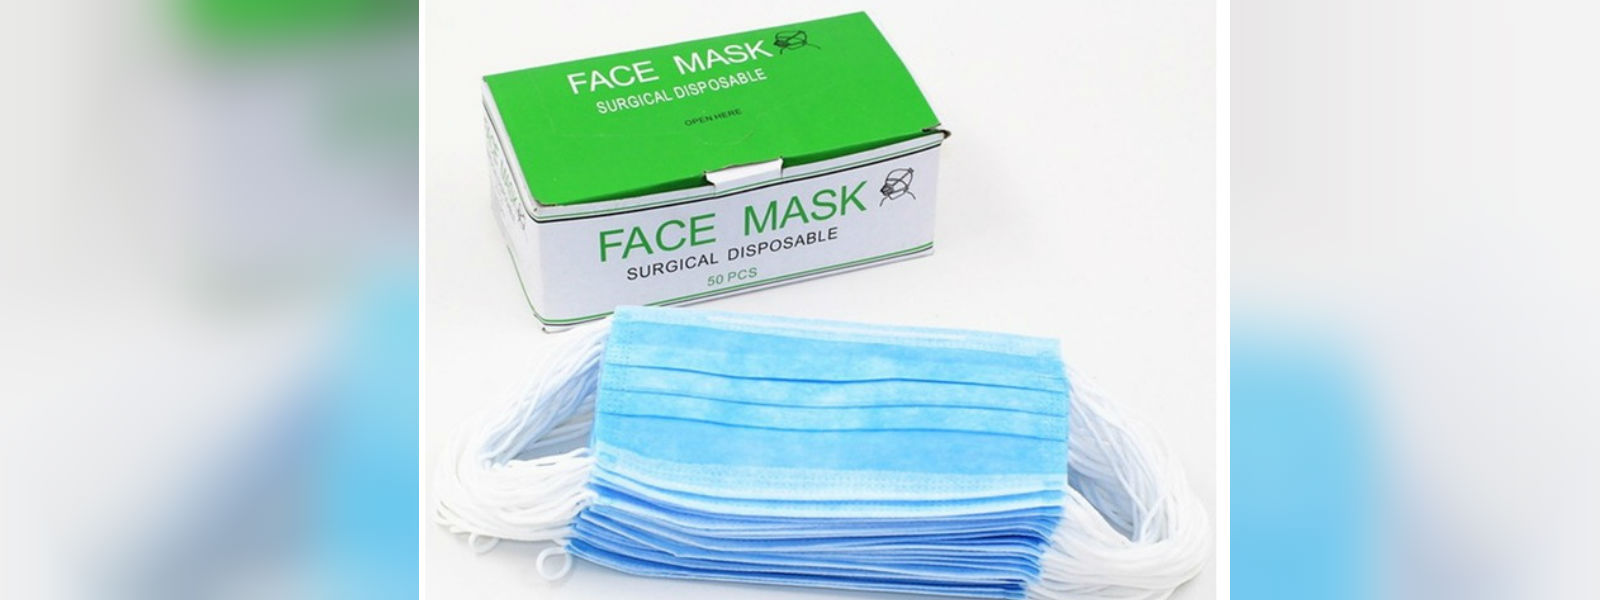 Mandatory to wear a face mask when travelling